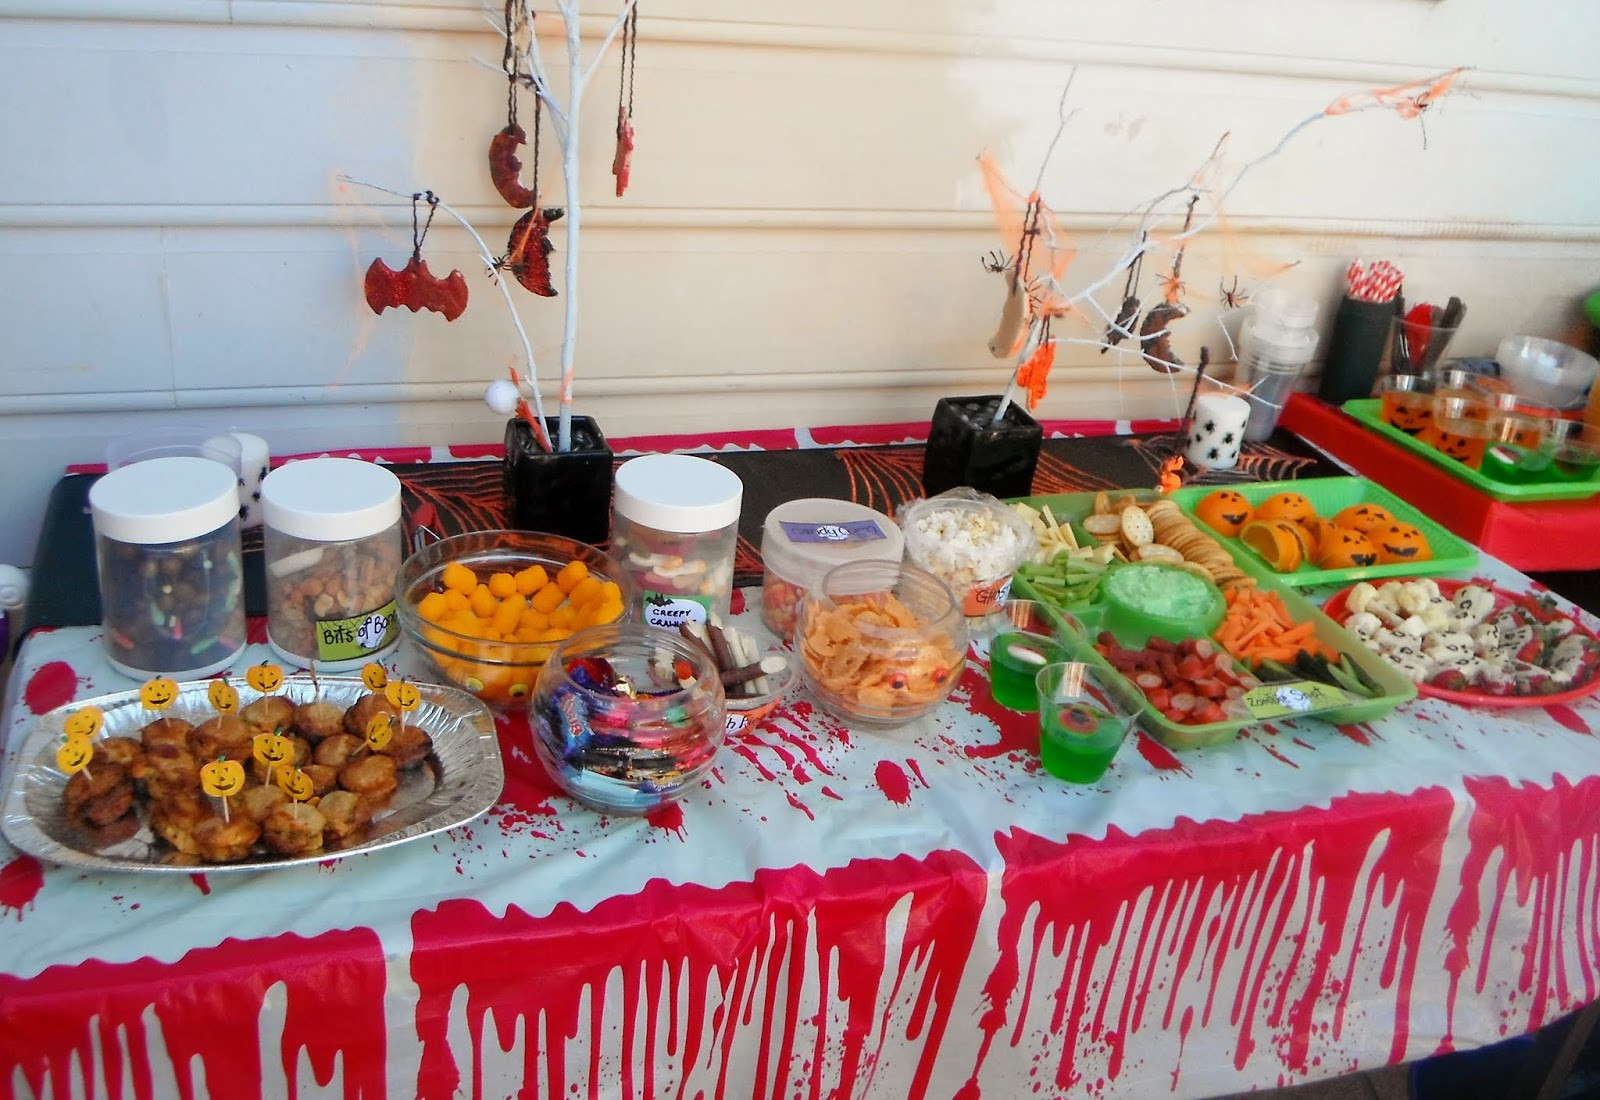 Food Ideas For Halloween Party
 Adventures at home with Mum Halloween Party Food